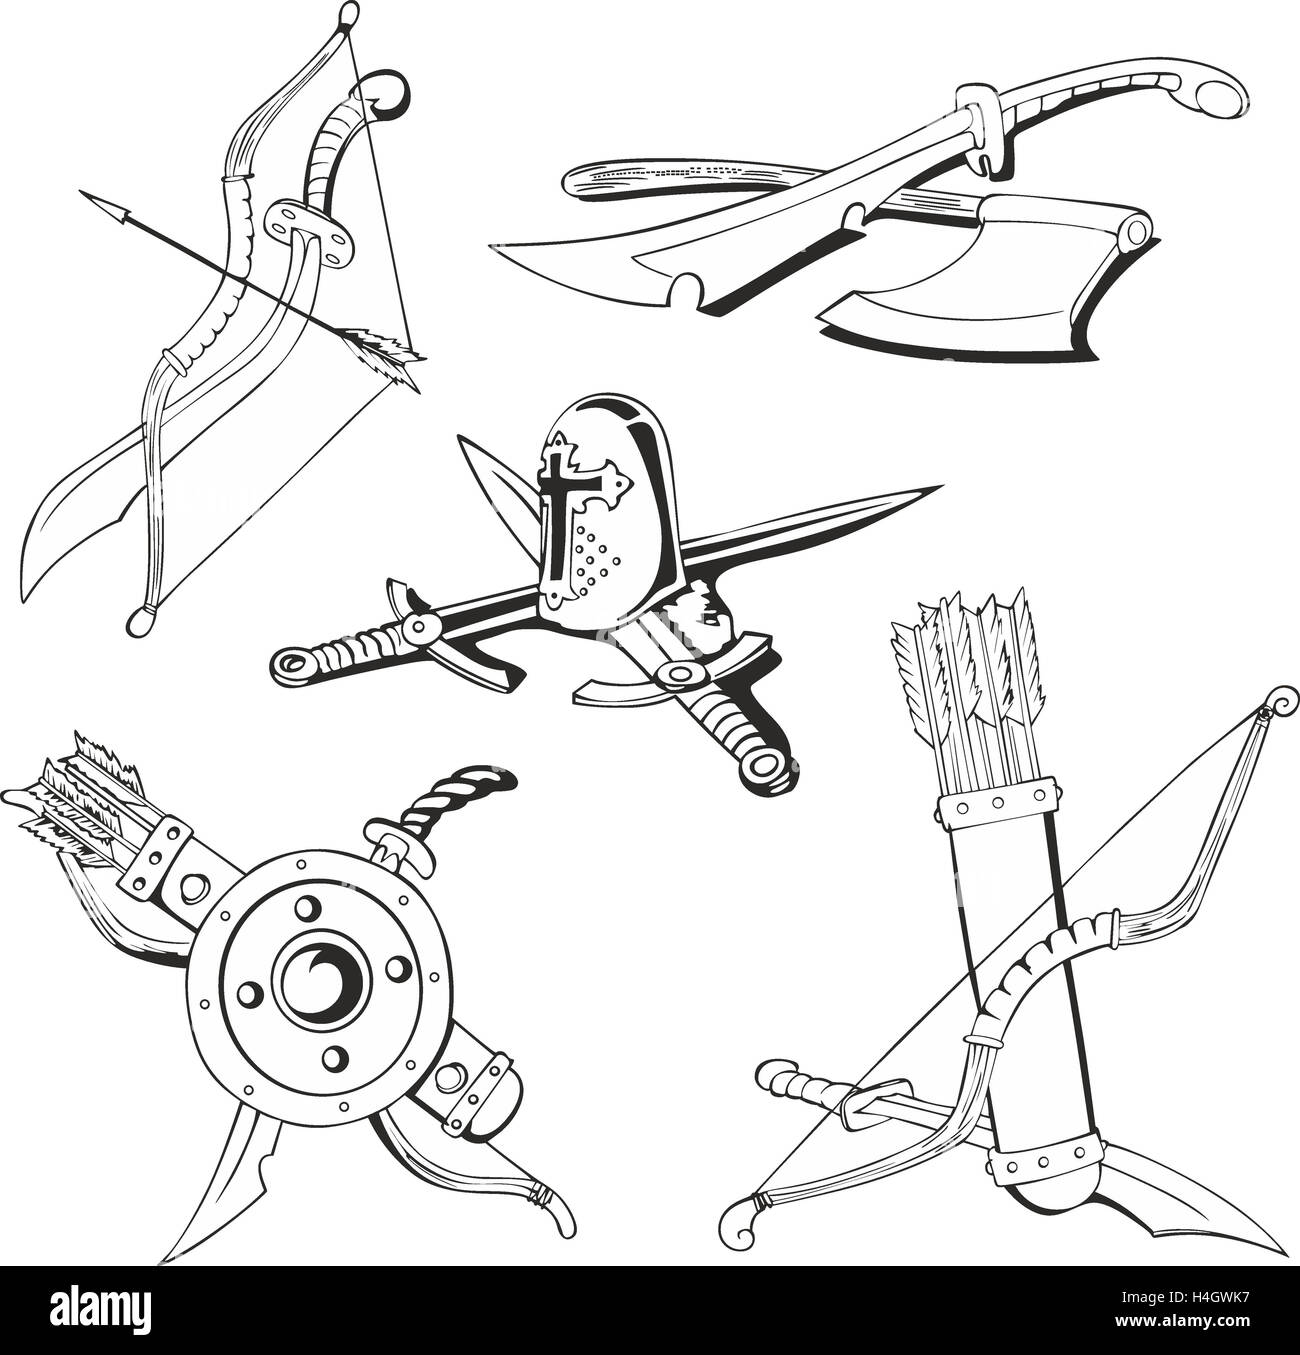 Set of outline black and white tattoo sketches of blades and old-time weapon - swords, bows and quivers with arrows, axe, shield Stock Photo